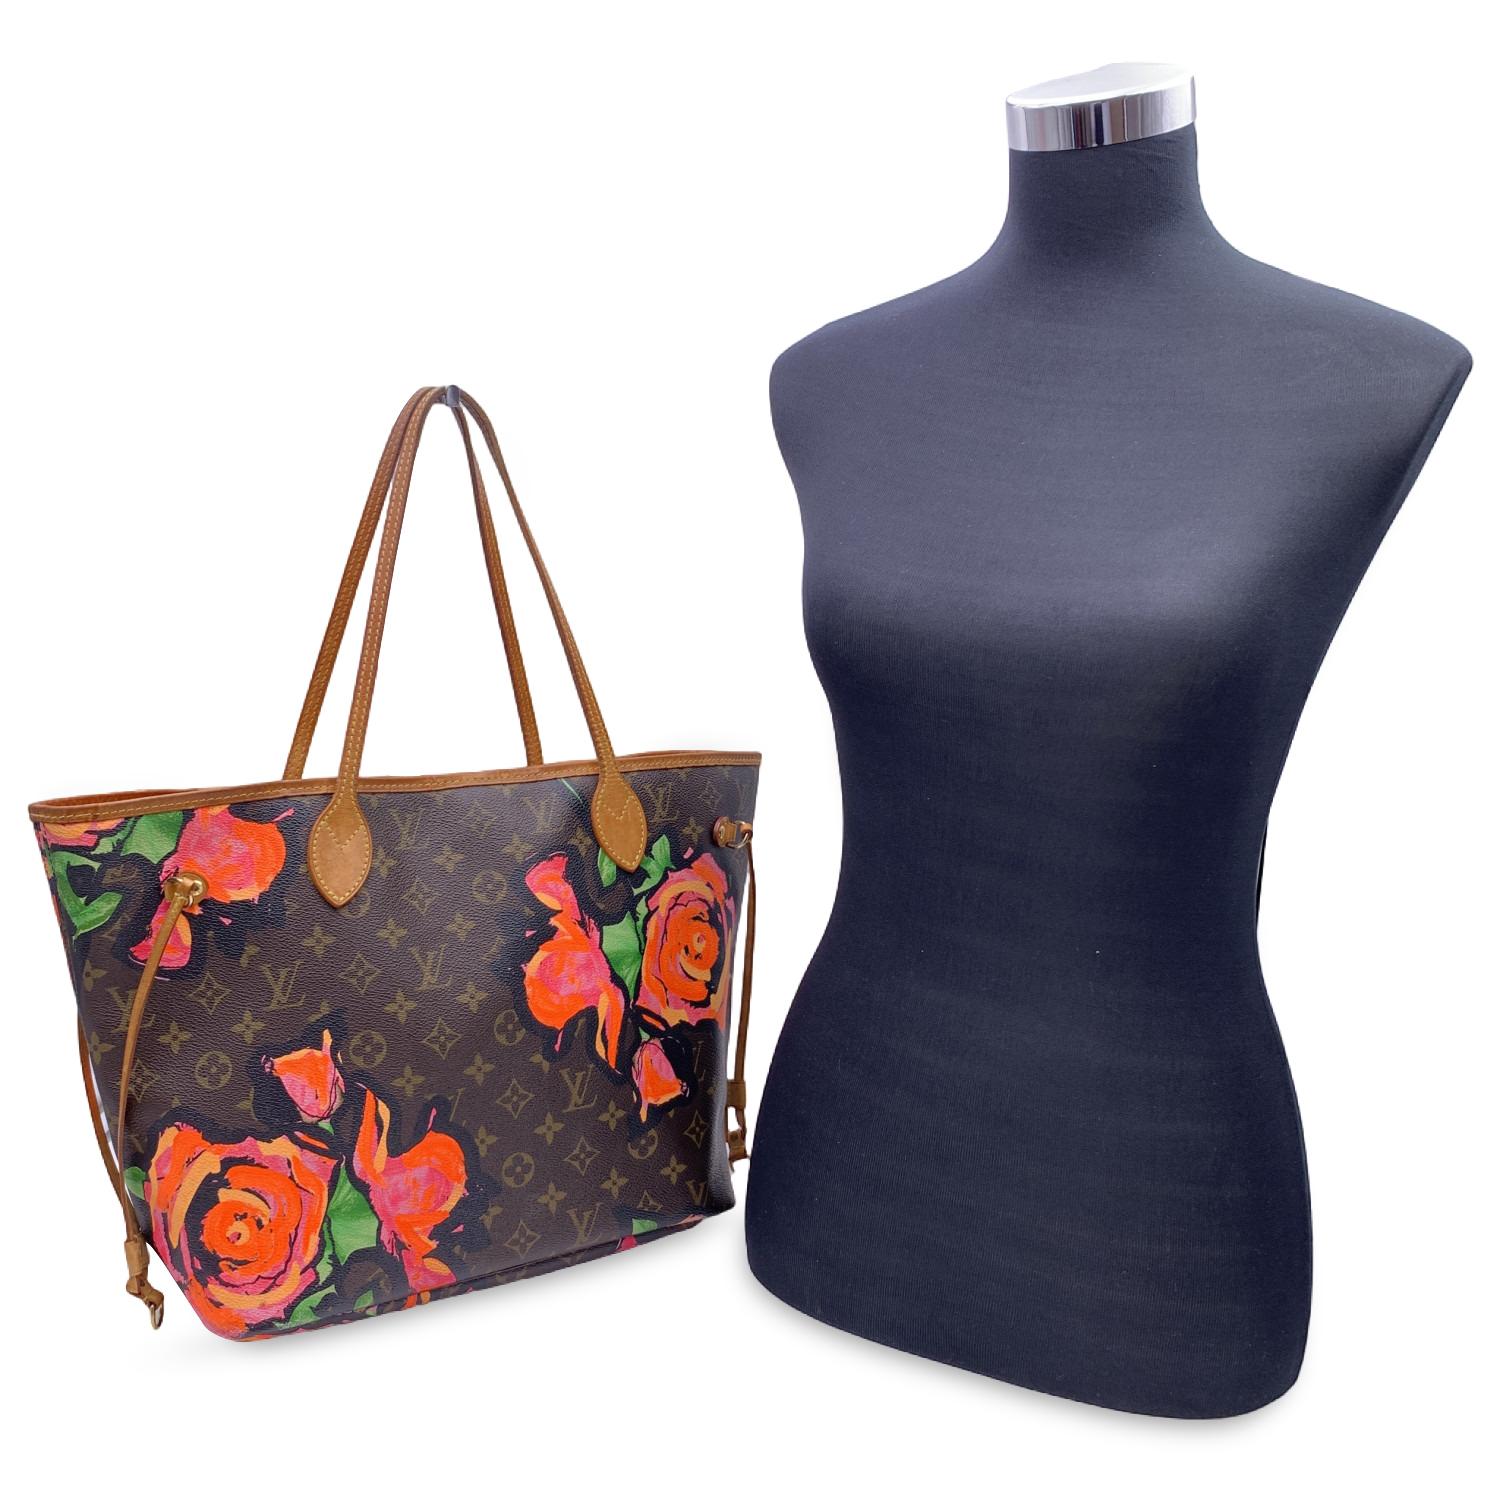 Limited edition Louis Vuitton 'Neverfull MM' tote bag, designed by Stephen Sprouse. Monogram canvas with and allover graffiti roses print in fuchsia, pink and orange colors. Hook closure on top. Internally is lined in pink fabric. 1 side zip pocket